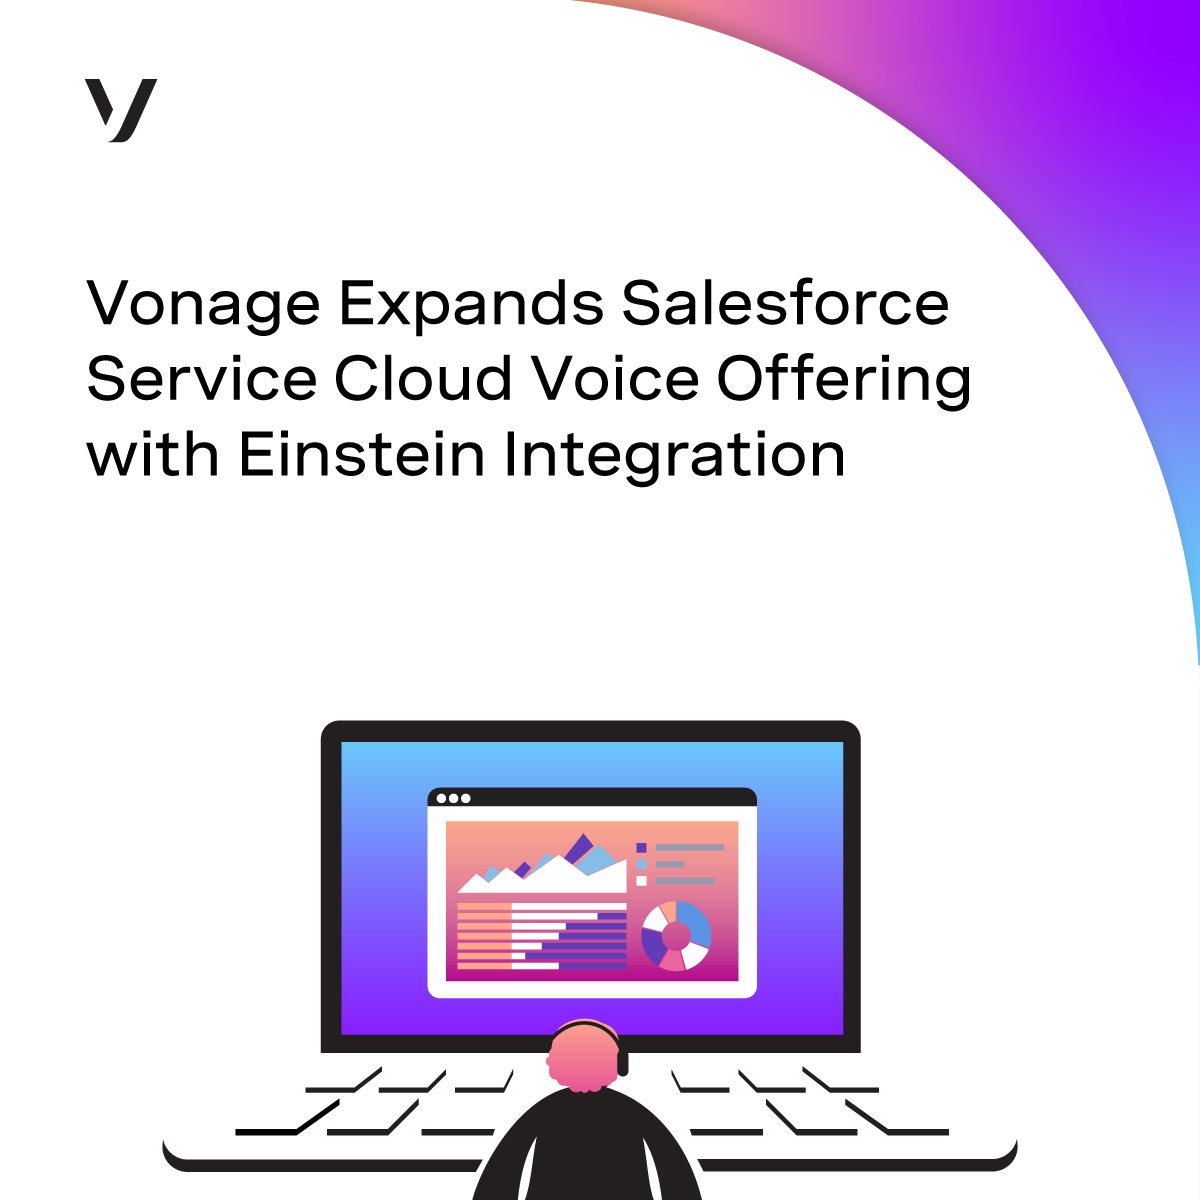 With Einstein Conversation Insights, Vonage Premier for Service Cloud Voice sales and service customers can see conversational data in real-time. bit.ly/4apDYOi #CX #AI #CCaaS #cctr